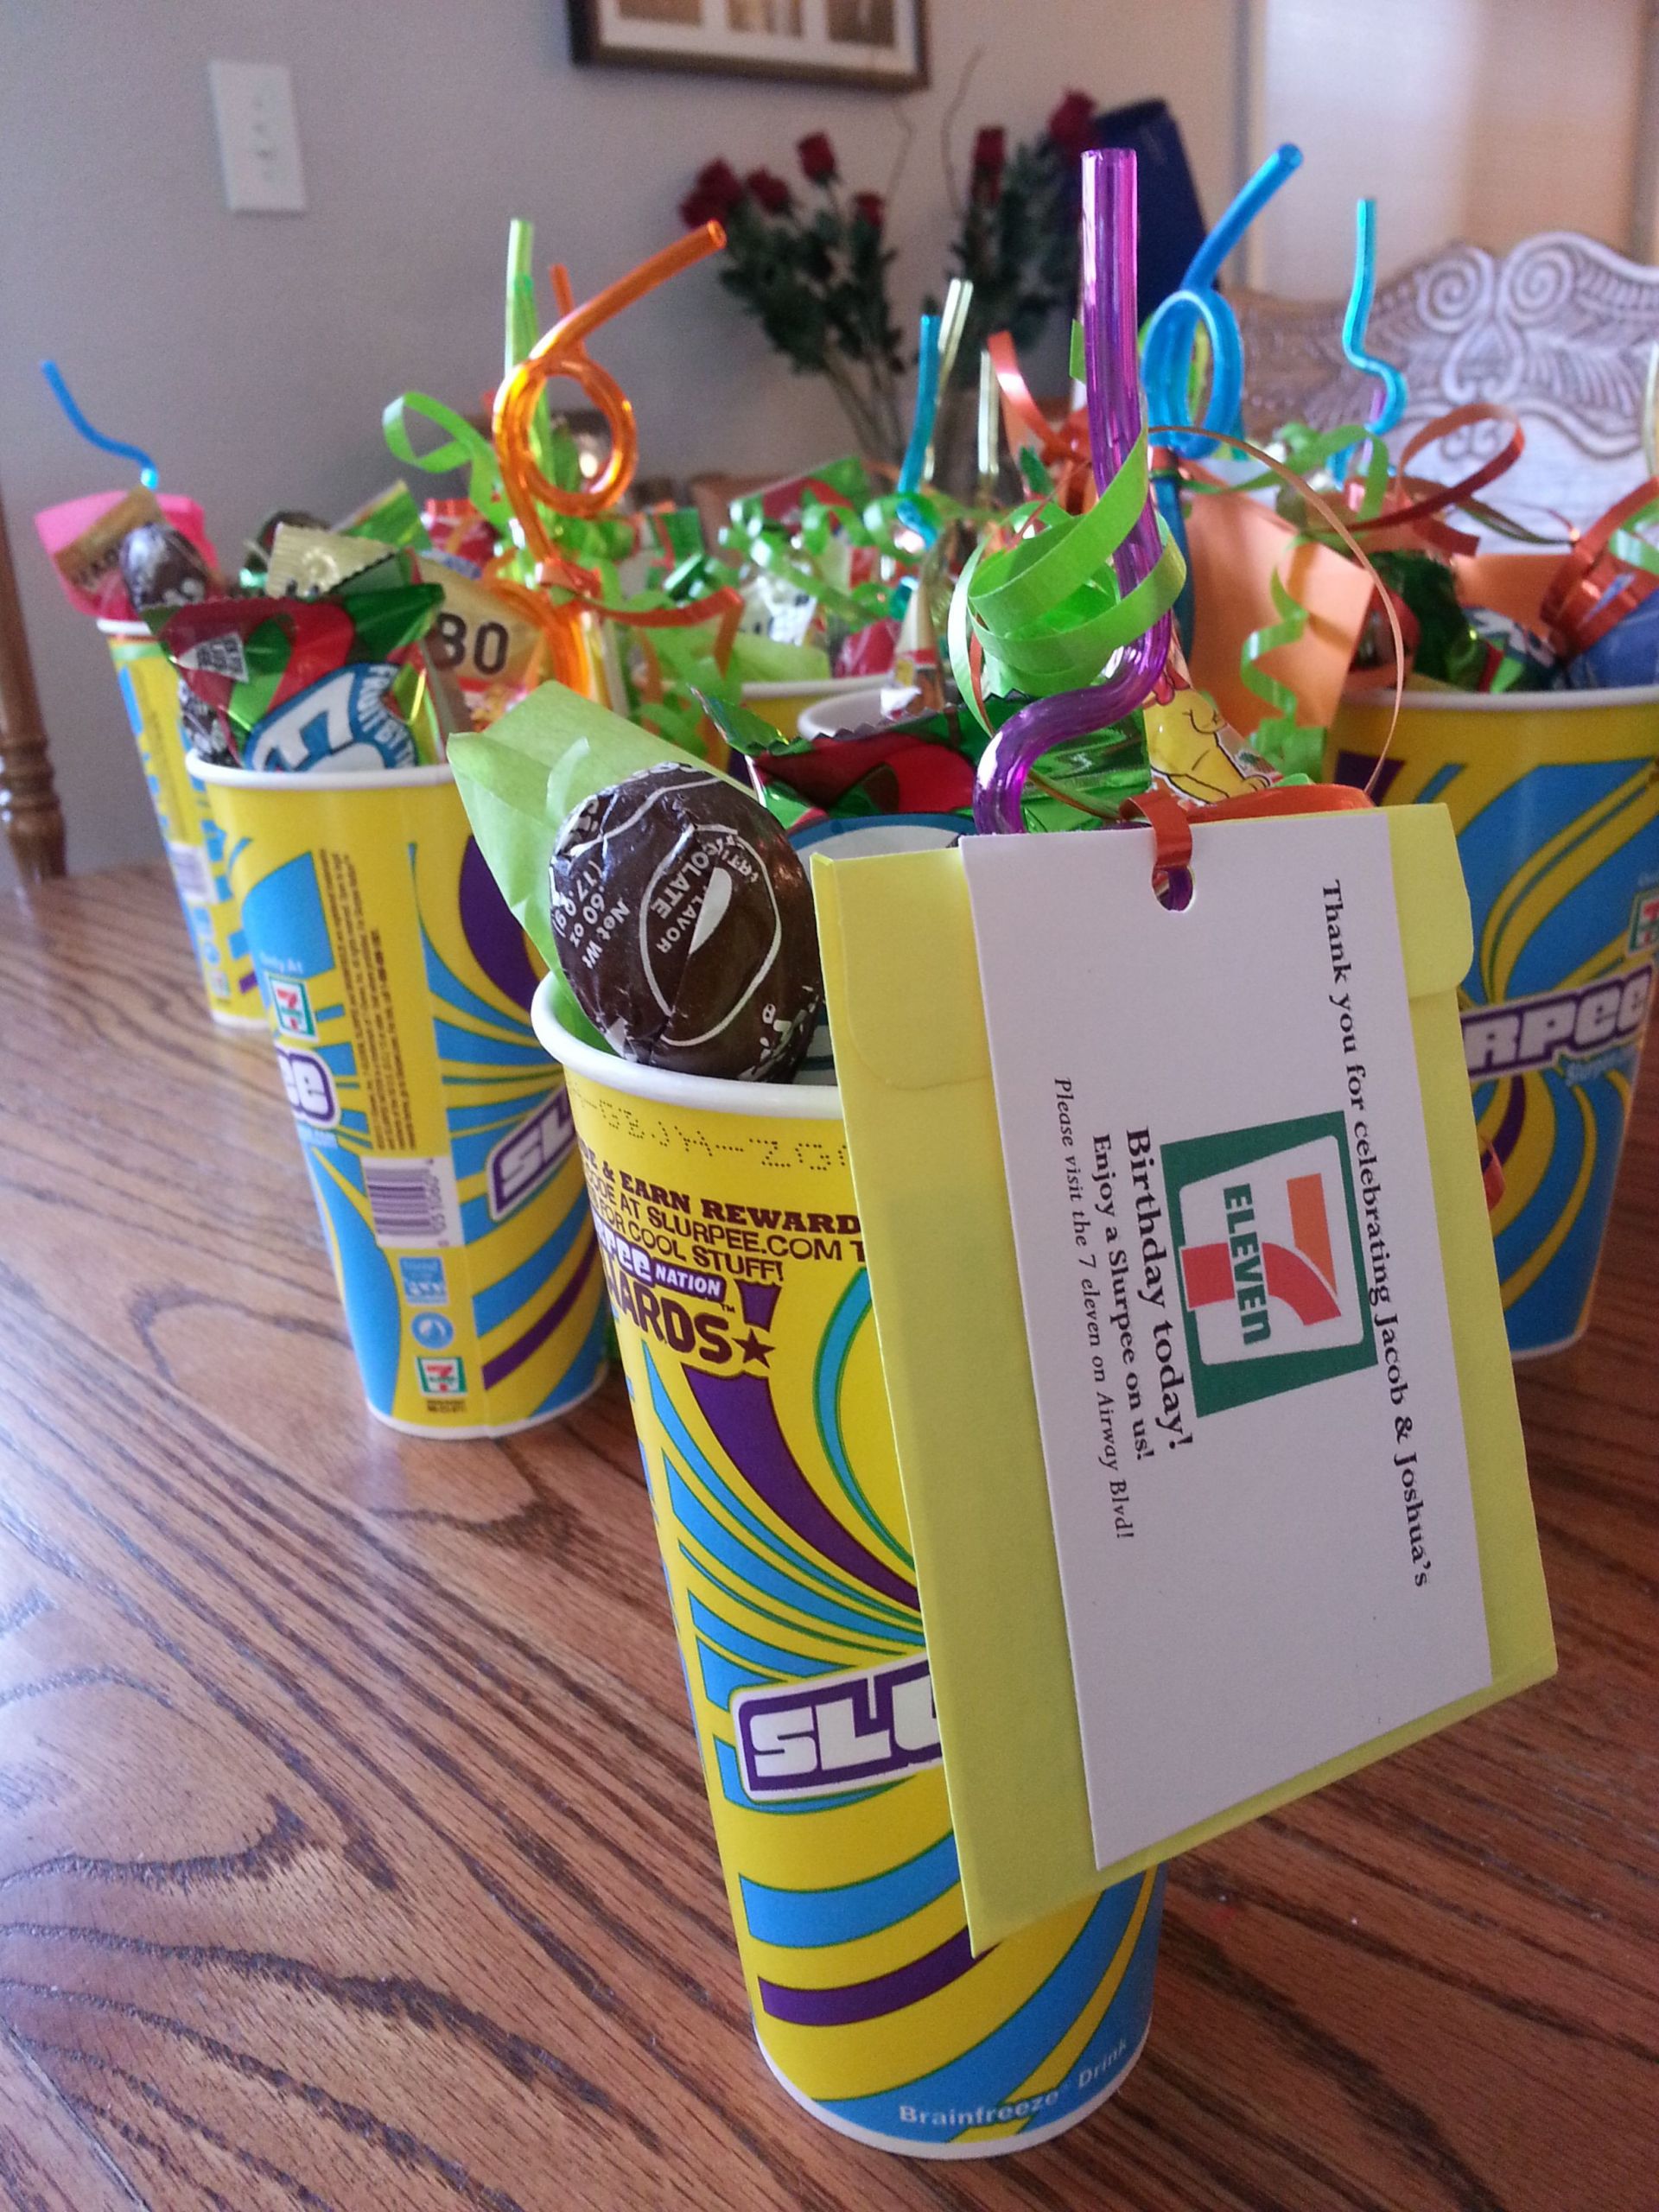 Boys Birthday Party Favor Ideas
 My boys turned 7 and 11 years old and their birthdays are